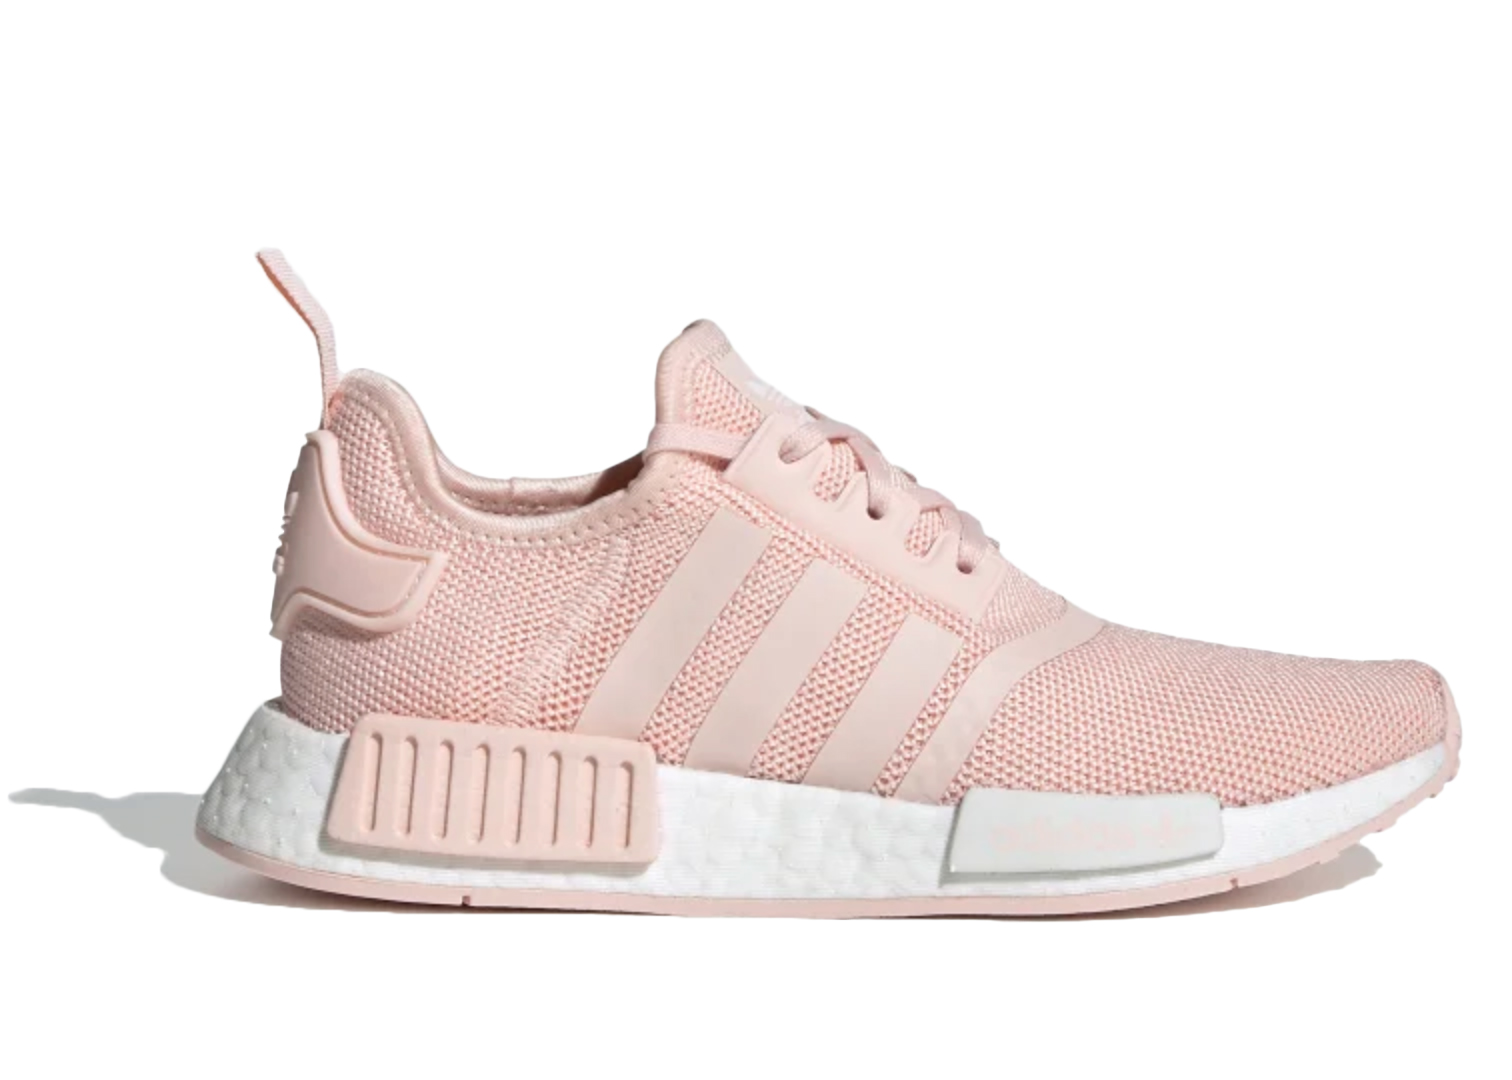 adidas NMD R1 Icey Pink (GS) - EE6682